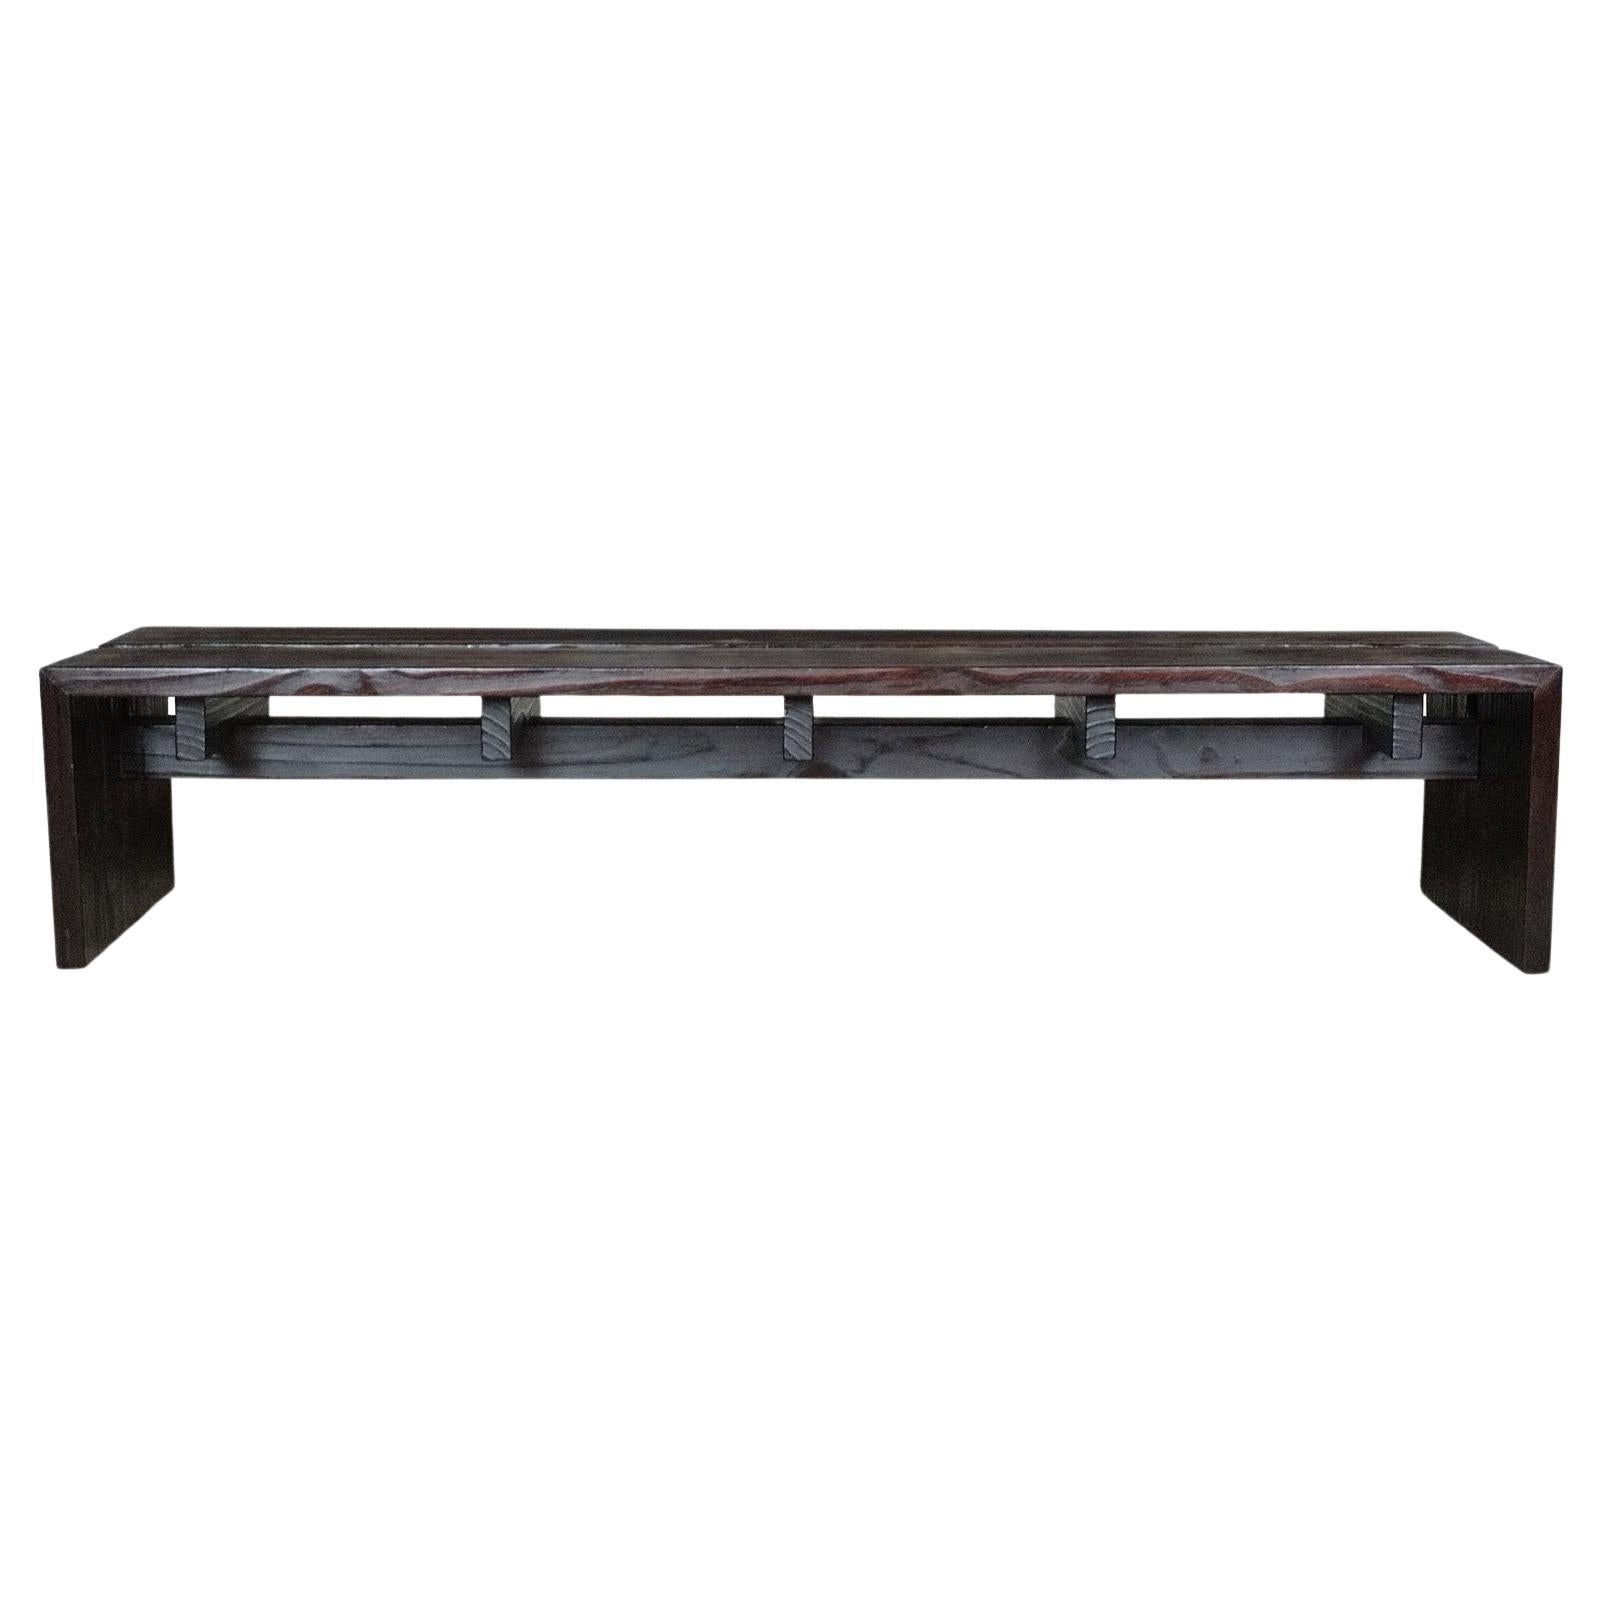 Remanso Bench in Brazilian Carbonized Solid Wood